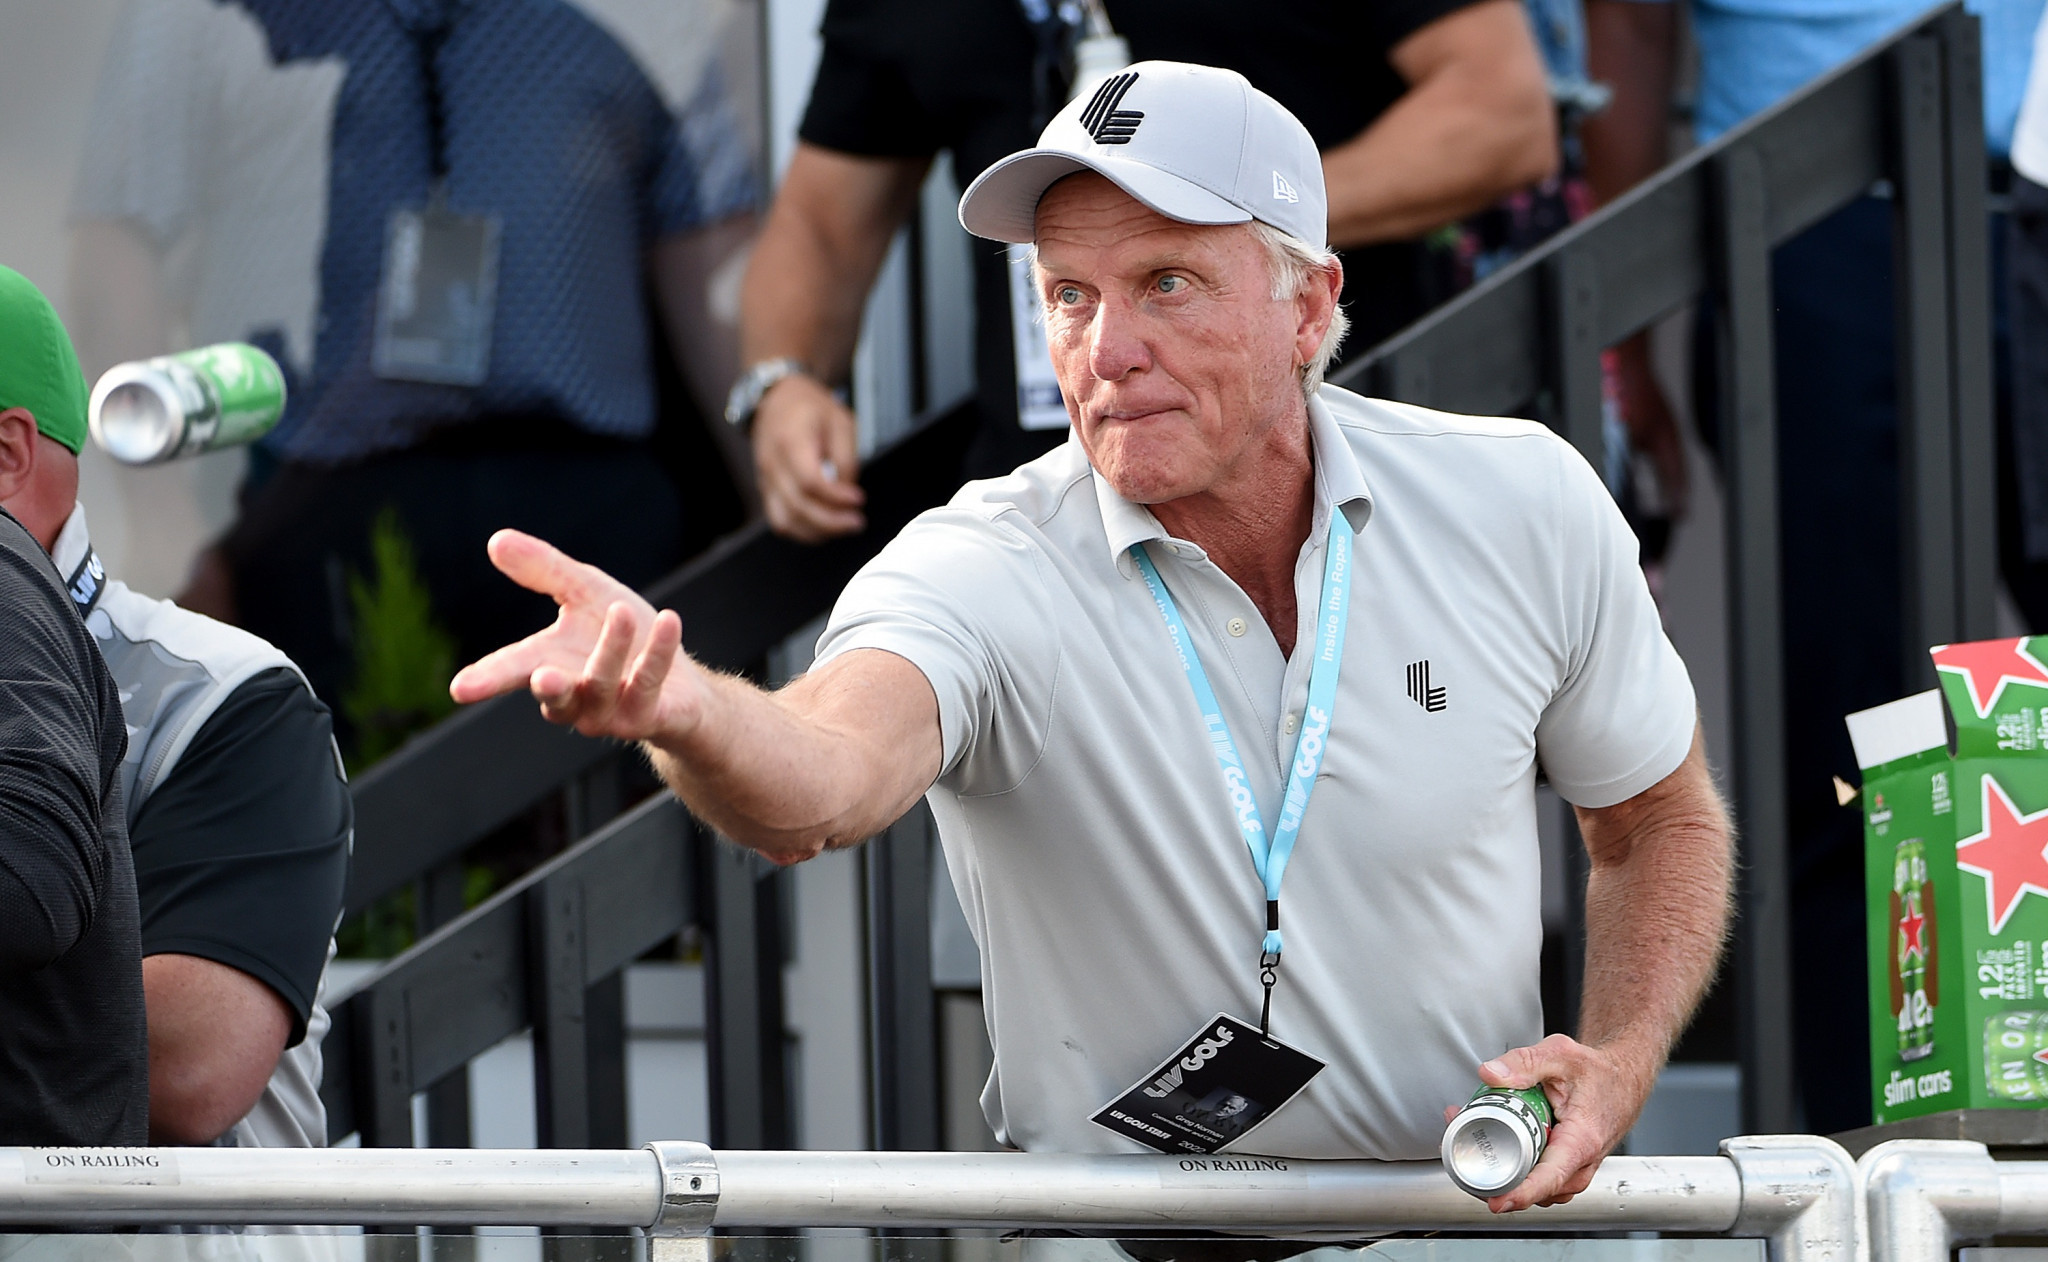 Norman hits out at "petty" R&A after The Open snub